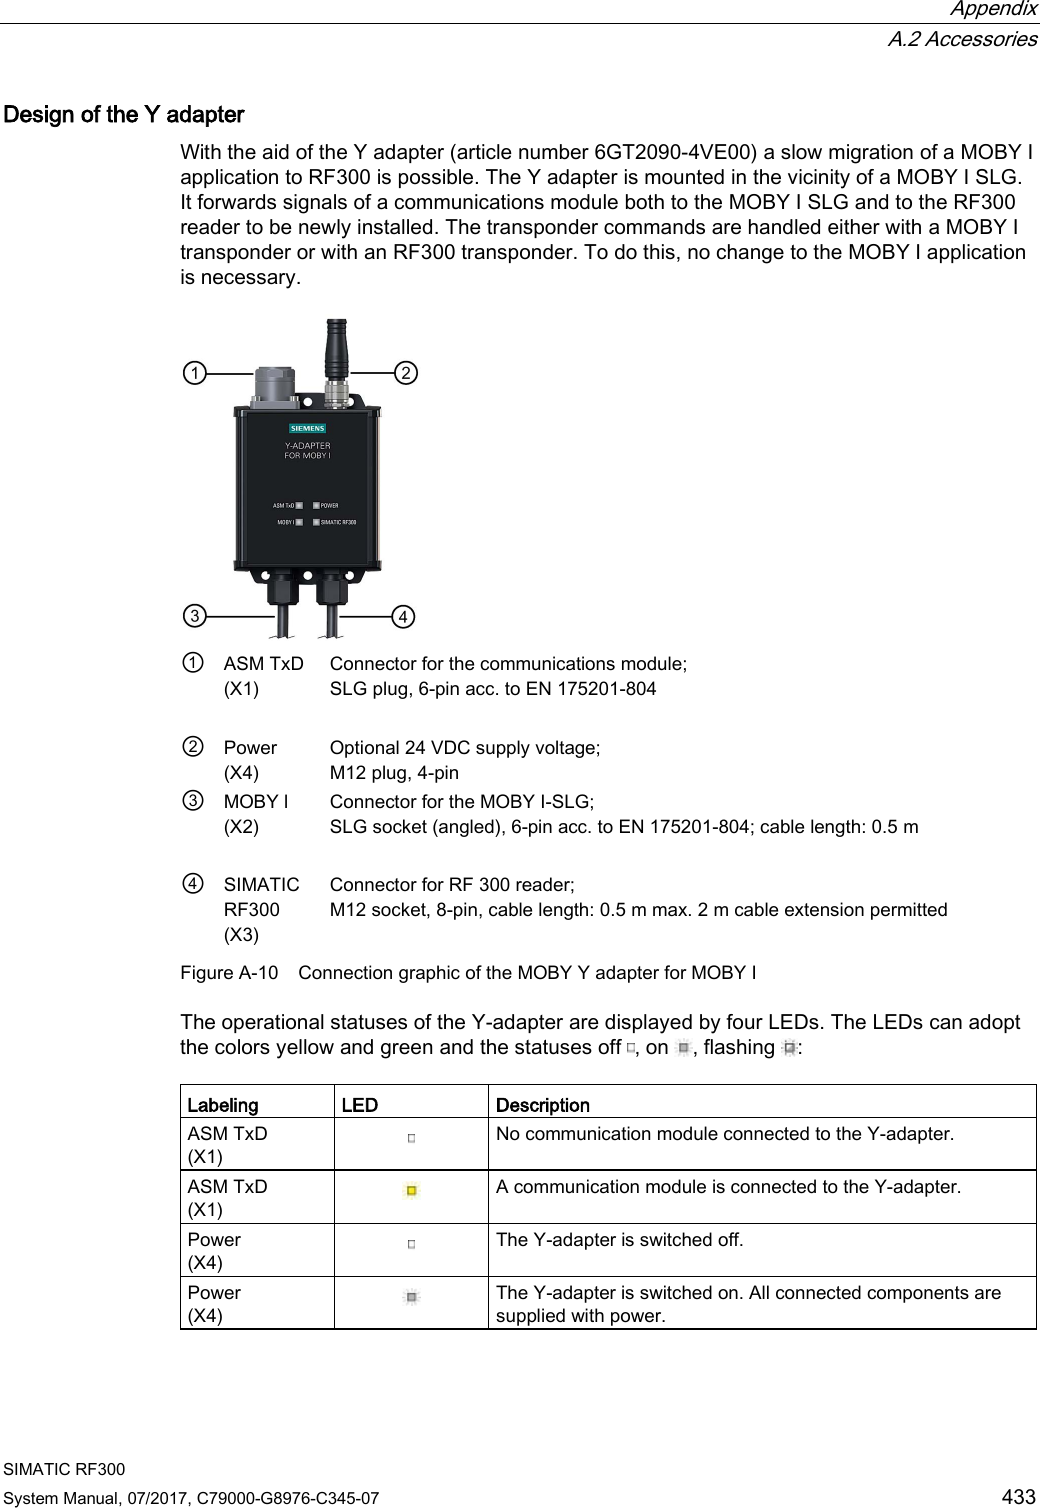  Appendix  A.2 Accessories SIMATIC RF300 System Manual, 07/2017, C79000-G8976-C345-07 433 Design of the Y adapter With the aid of the Y adapter (article number 6GT2090-4VE00) a slow migration of a MOBY I application to RF300 is possible. The Y adapter is mounted in the vicinity of a MOBY I SLG. It forwards signals of a communications module both to the MOBY I SLG and to the RF300 reader to be newly installed. The transponder commands are handled either with a MOBY I transponder or with an RF300 transponder. To do this, no change to the MOBY I application is necessary.  ① ASM TxD (X1)  Connector for the communications module;  SLG plug, 6-pin acc. to EN 175201-804 ② Power (X4) Optional 24 VDC supply voltage;  M12 plug, 4-pin ③ MOBY l (X2)  Connector for the MOBY I-SLG;  SLG socket (angled), 6-pin acc. to EN 175201-804; cable length: 0.5 m ④  SIMATIC RF300 (X3) Connector for RF 300 reader;  M12 socket, 8-pin, cable length: 0.5 m max. 2 m cable extension permitted Figure A-10 Connection graphic of the MOBY Y adapter for MOBY I The operational statuses of the Y-adapter are displayed by four LEDs. The LEDs can adopt the colors yellow and green and the statuses off  , on  , flashing  :  Labeling LED Description ASM TxD (X1)  No communication module connected to the Y-adapter. ASM TxD (X1)  A communication module is connected to the Y-adapter. Power (X4)  The Y-adapter is switched off. Power (X4)  The Y-adapter is switched on. All connected components are supplied with power. 